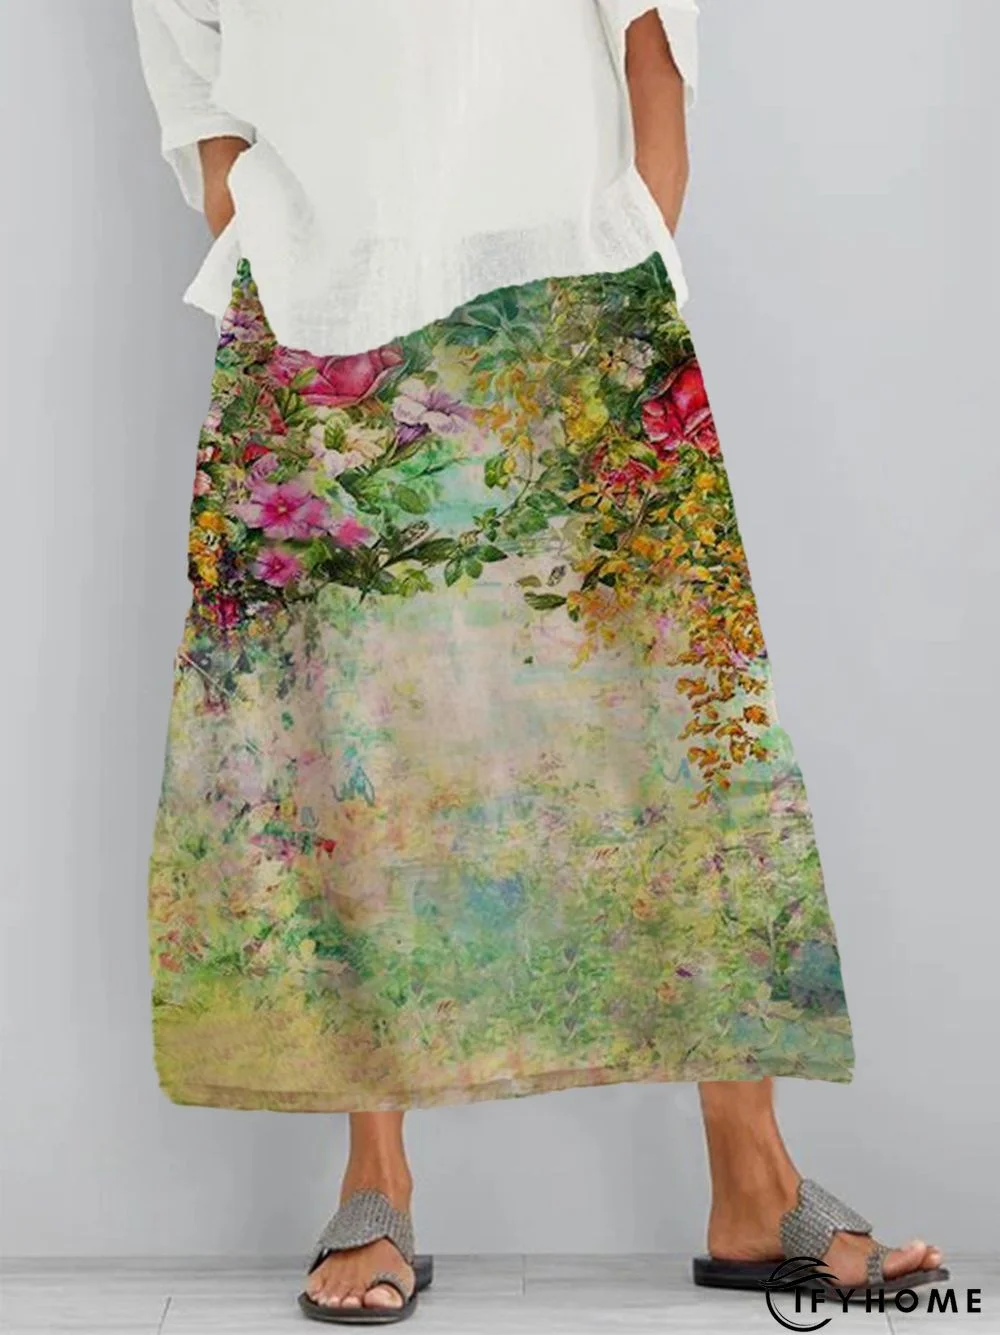 New Women Chic Vintage Floral Boho A-Line Vintage Skirt | IFYHOME